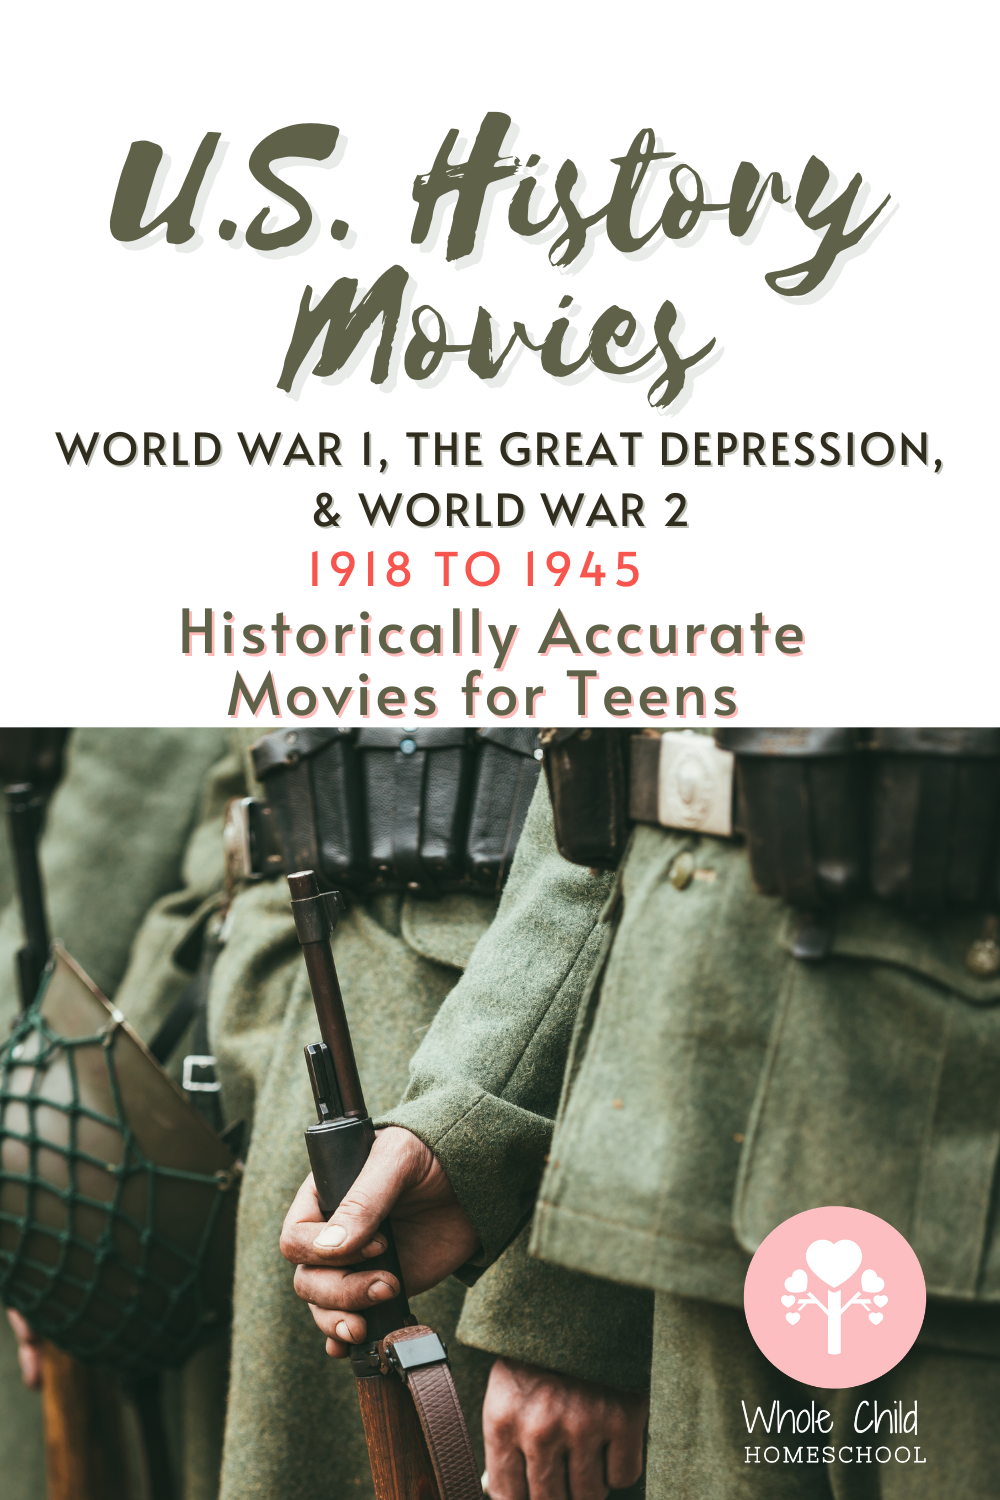 Learn American History through Movies